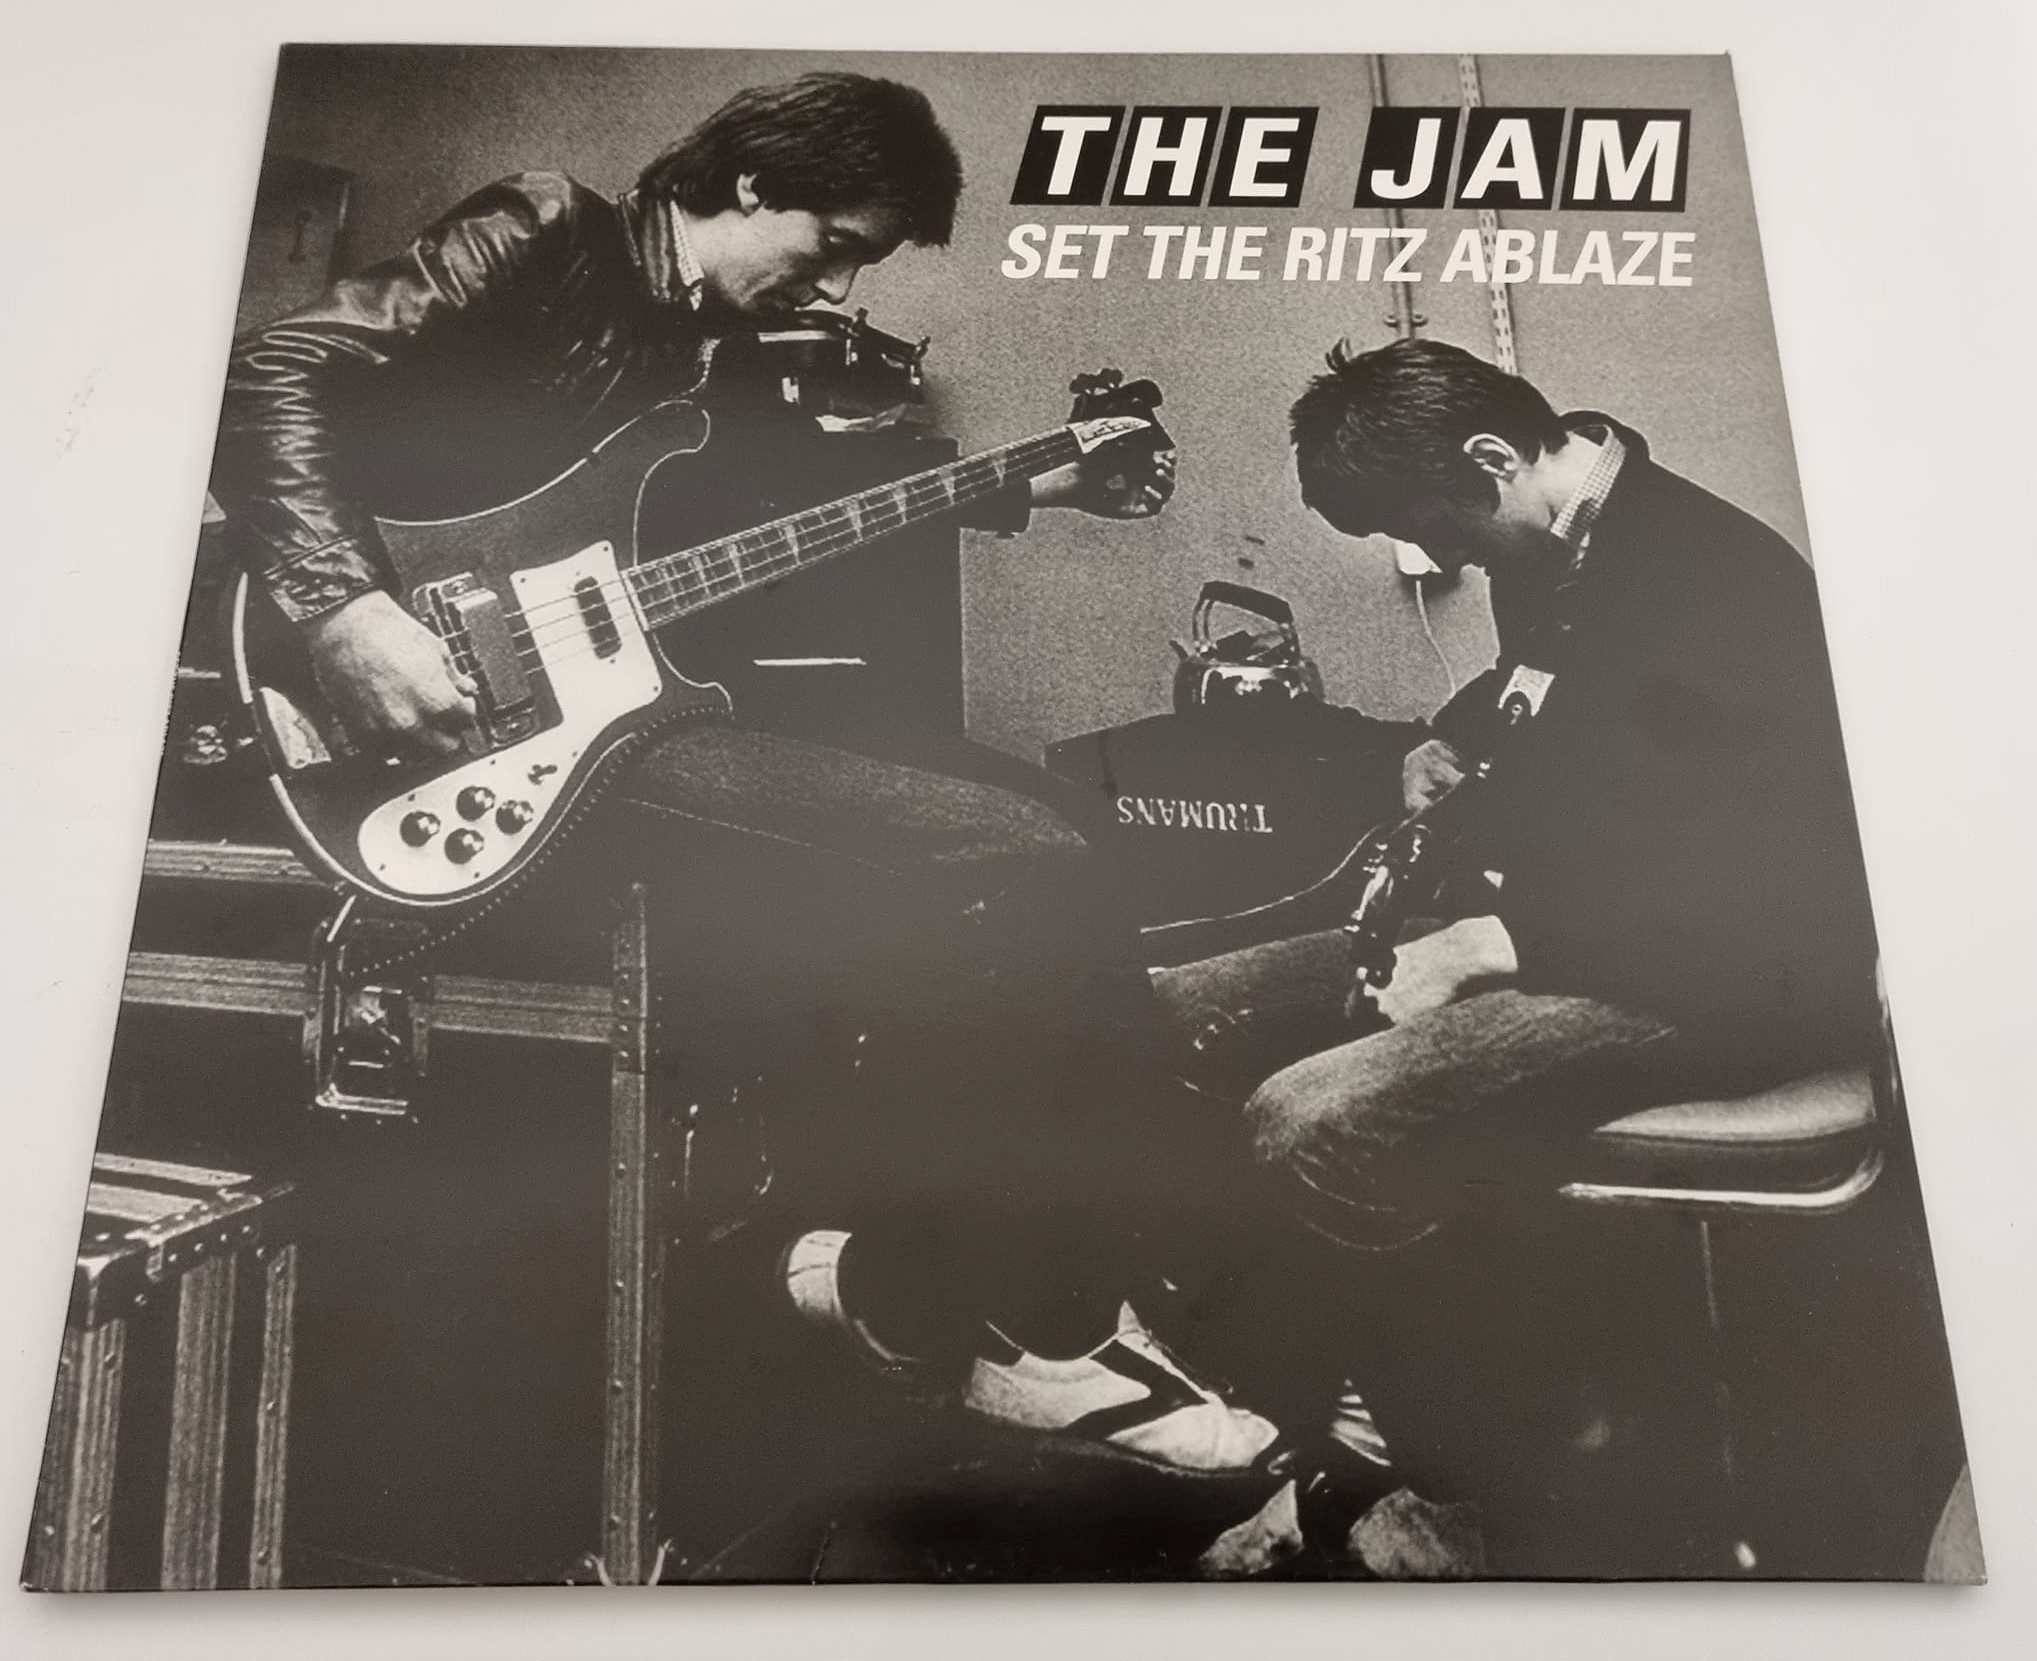 Buy this rare Jam record by clicking here